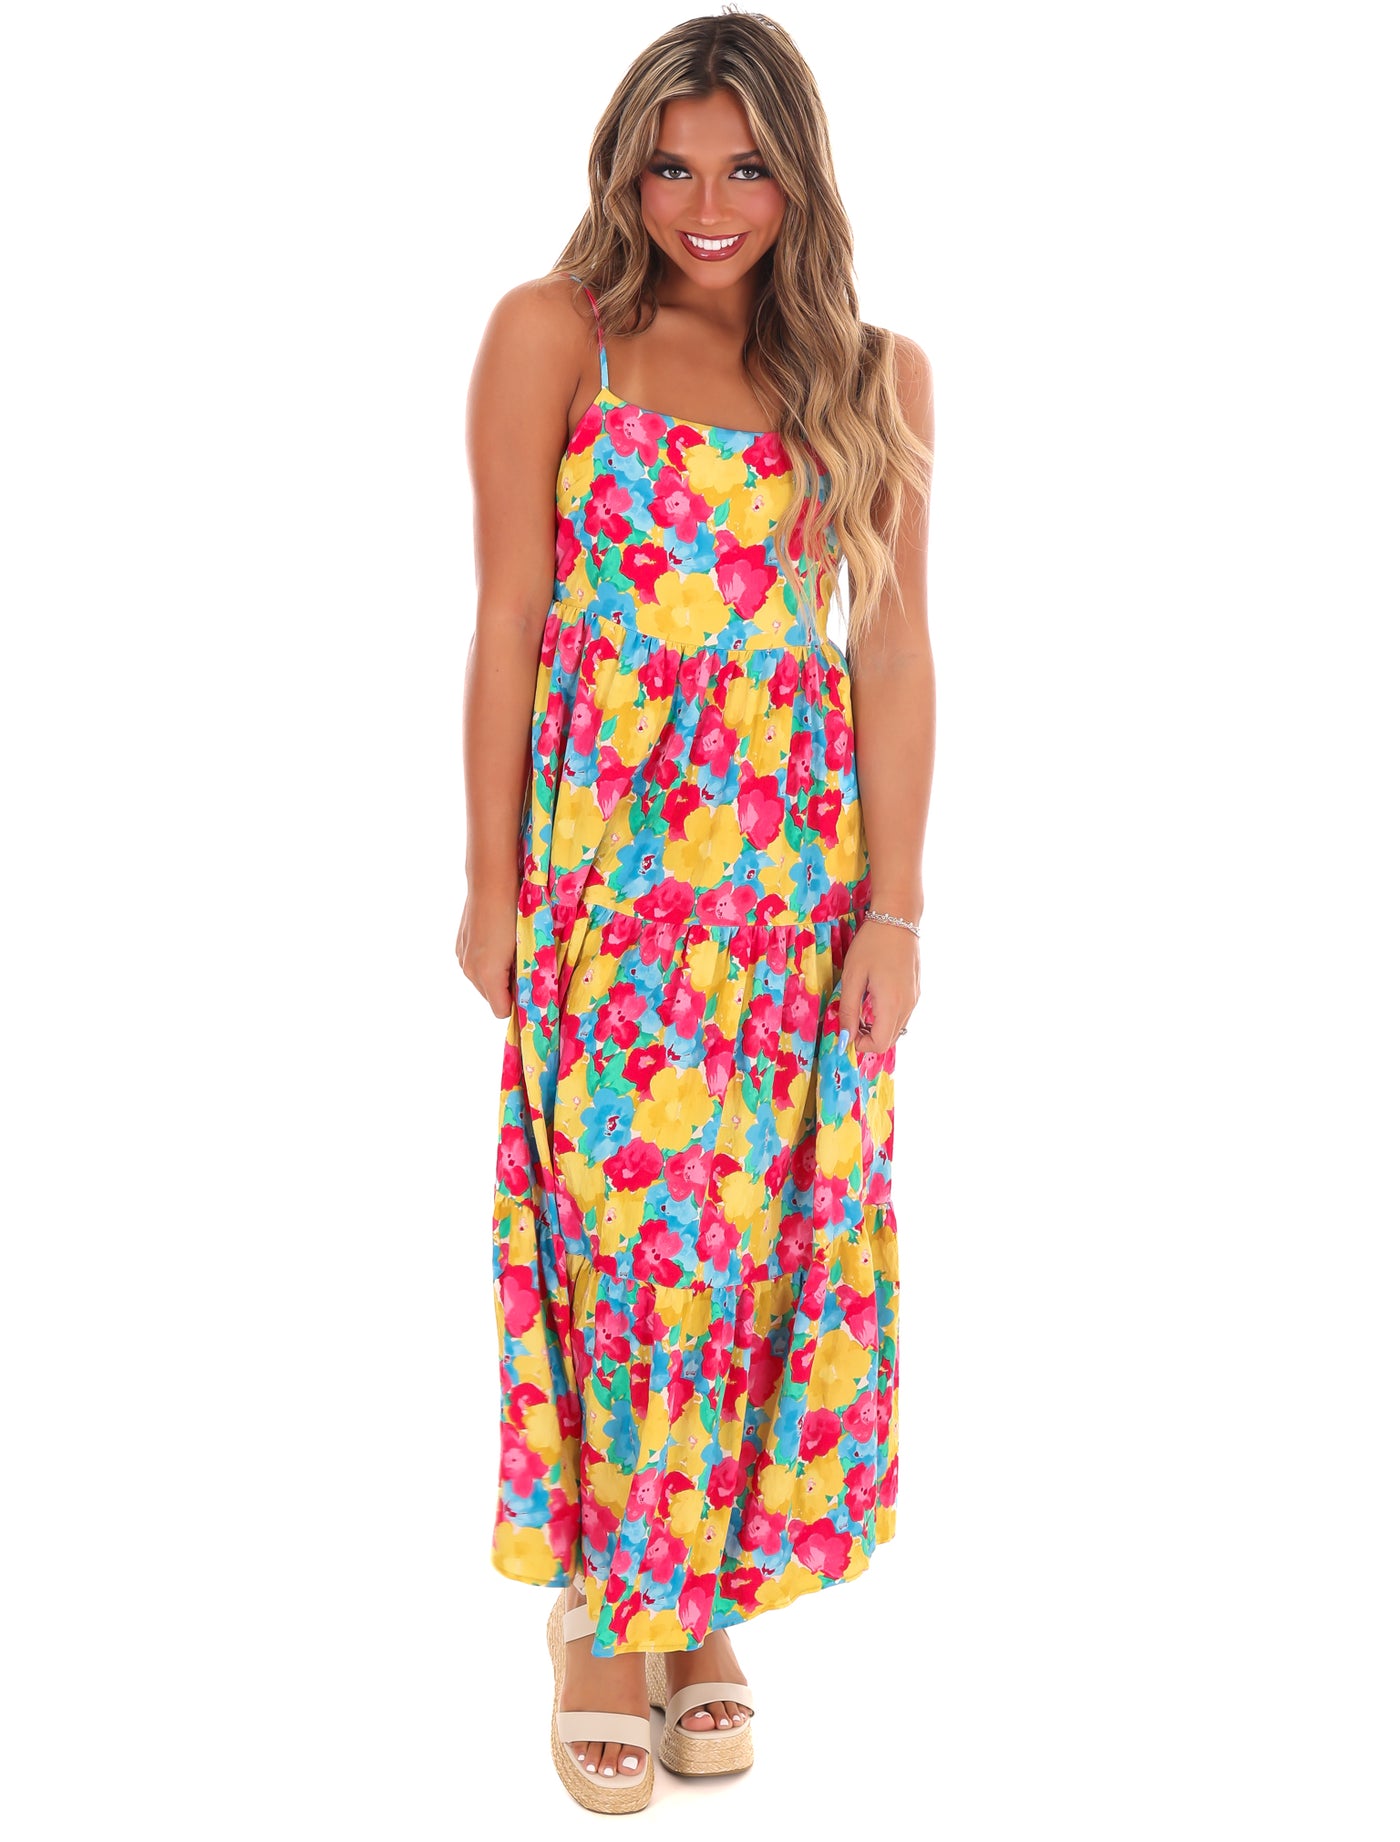 Southern Girl Floral Maxi Dress